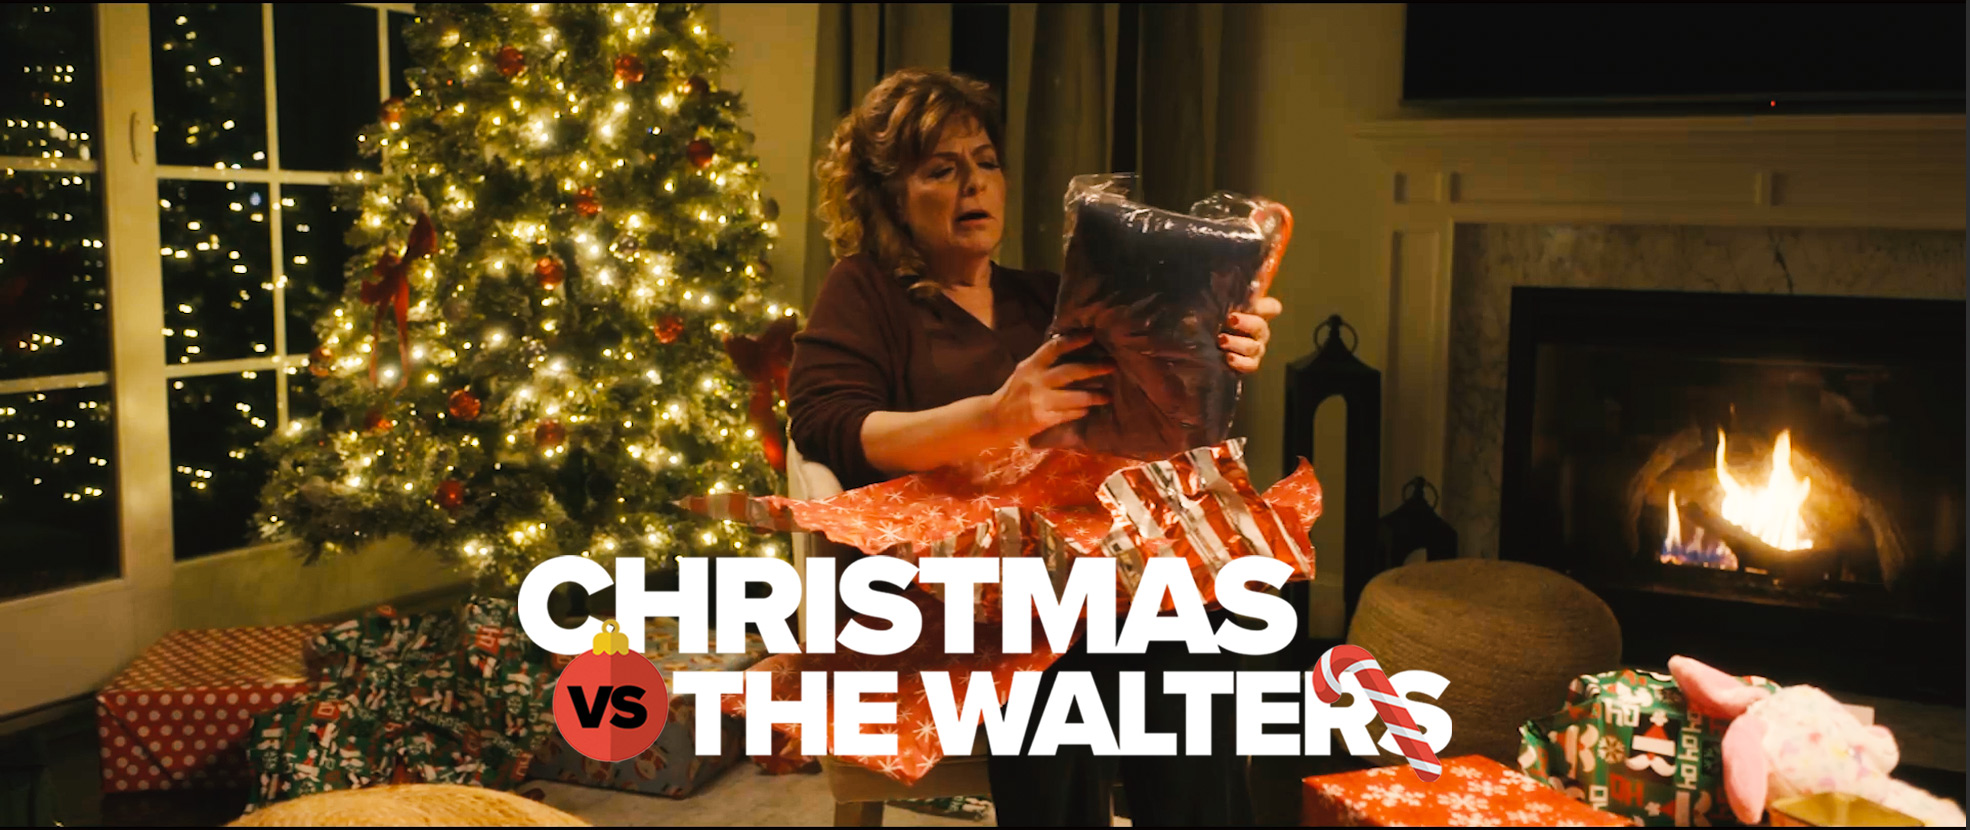 Watch Christmas vs. The Walters